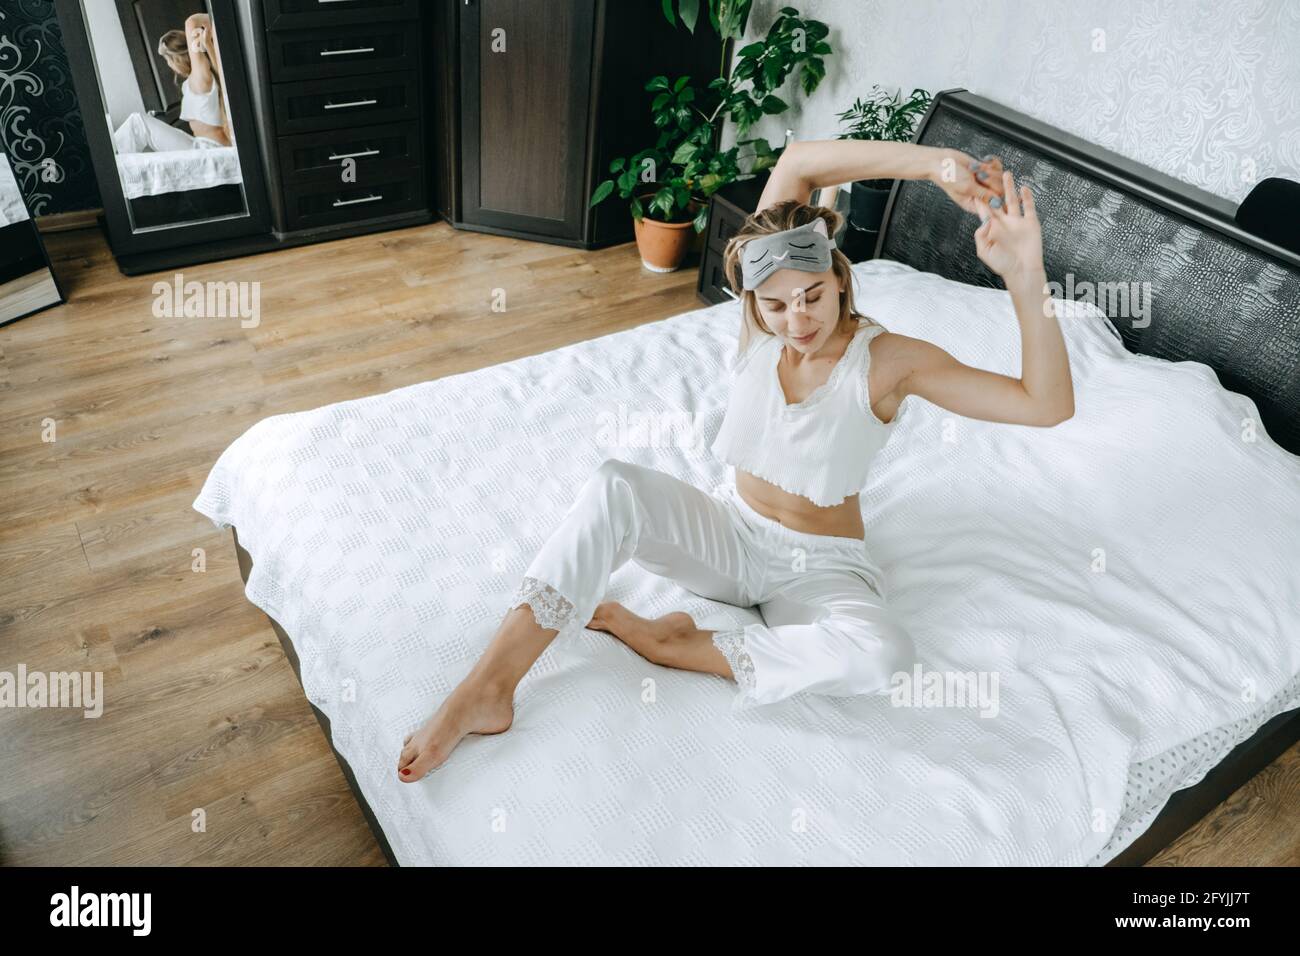 Self care, Mental health, mental wellbeing, calm, mourning routines, start day. No stress, healthy habit, concept. Young woman in pajamas doing Stock Photo